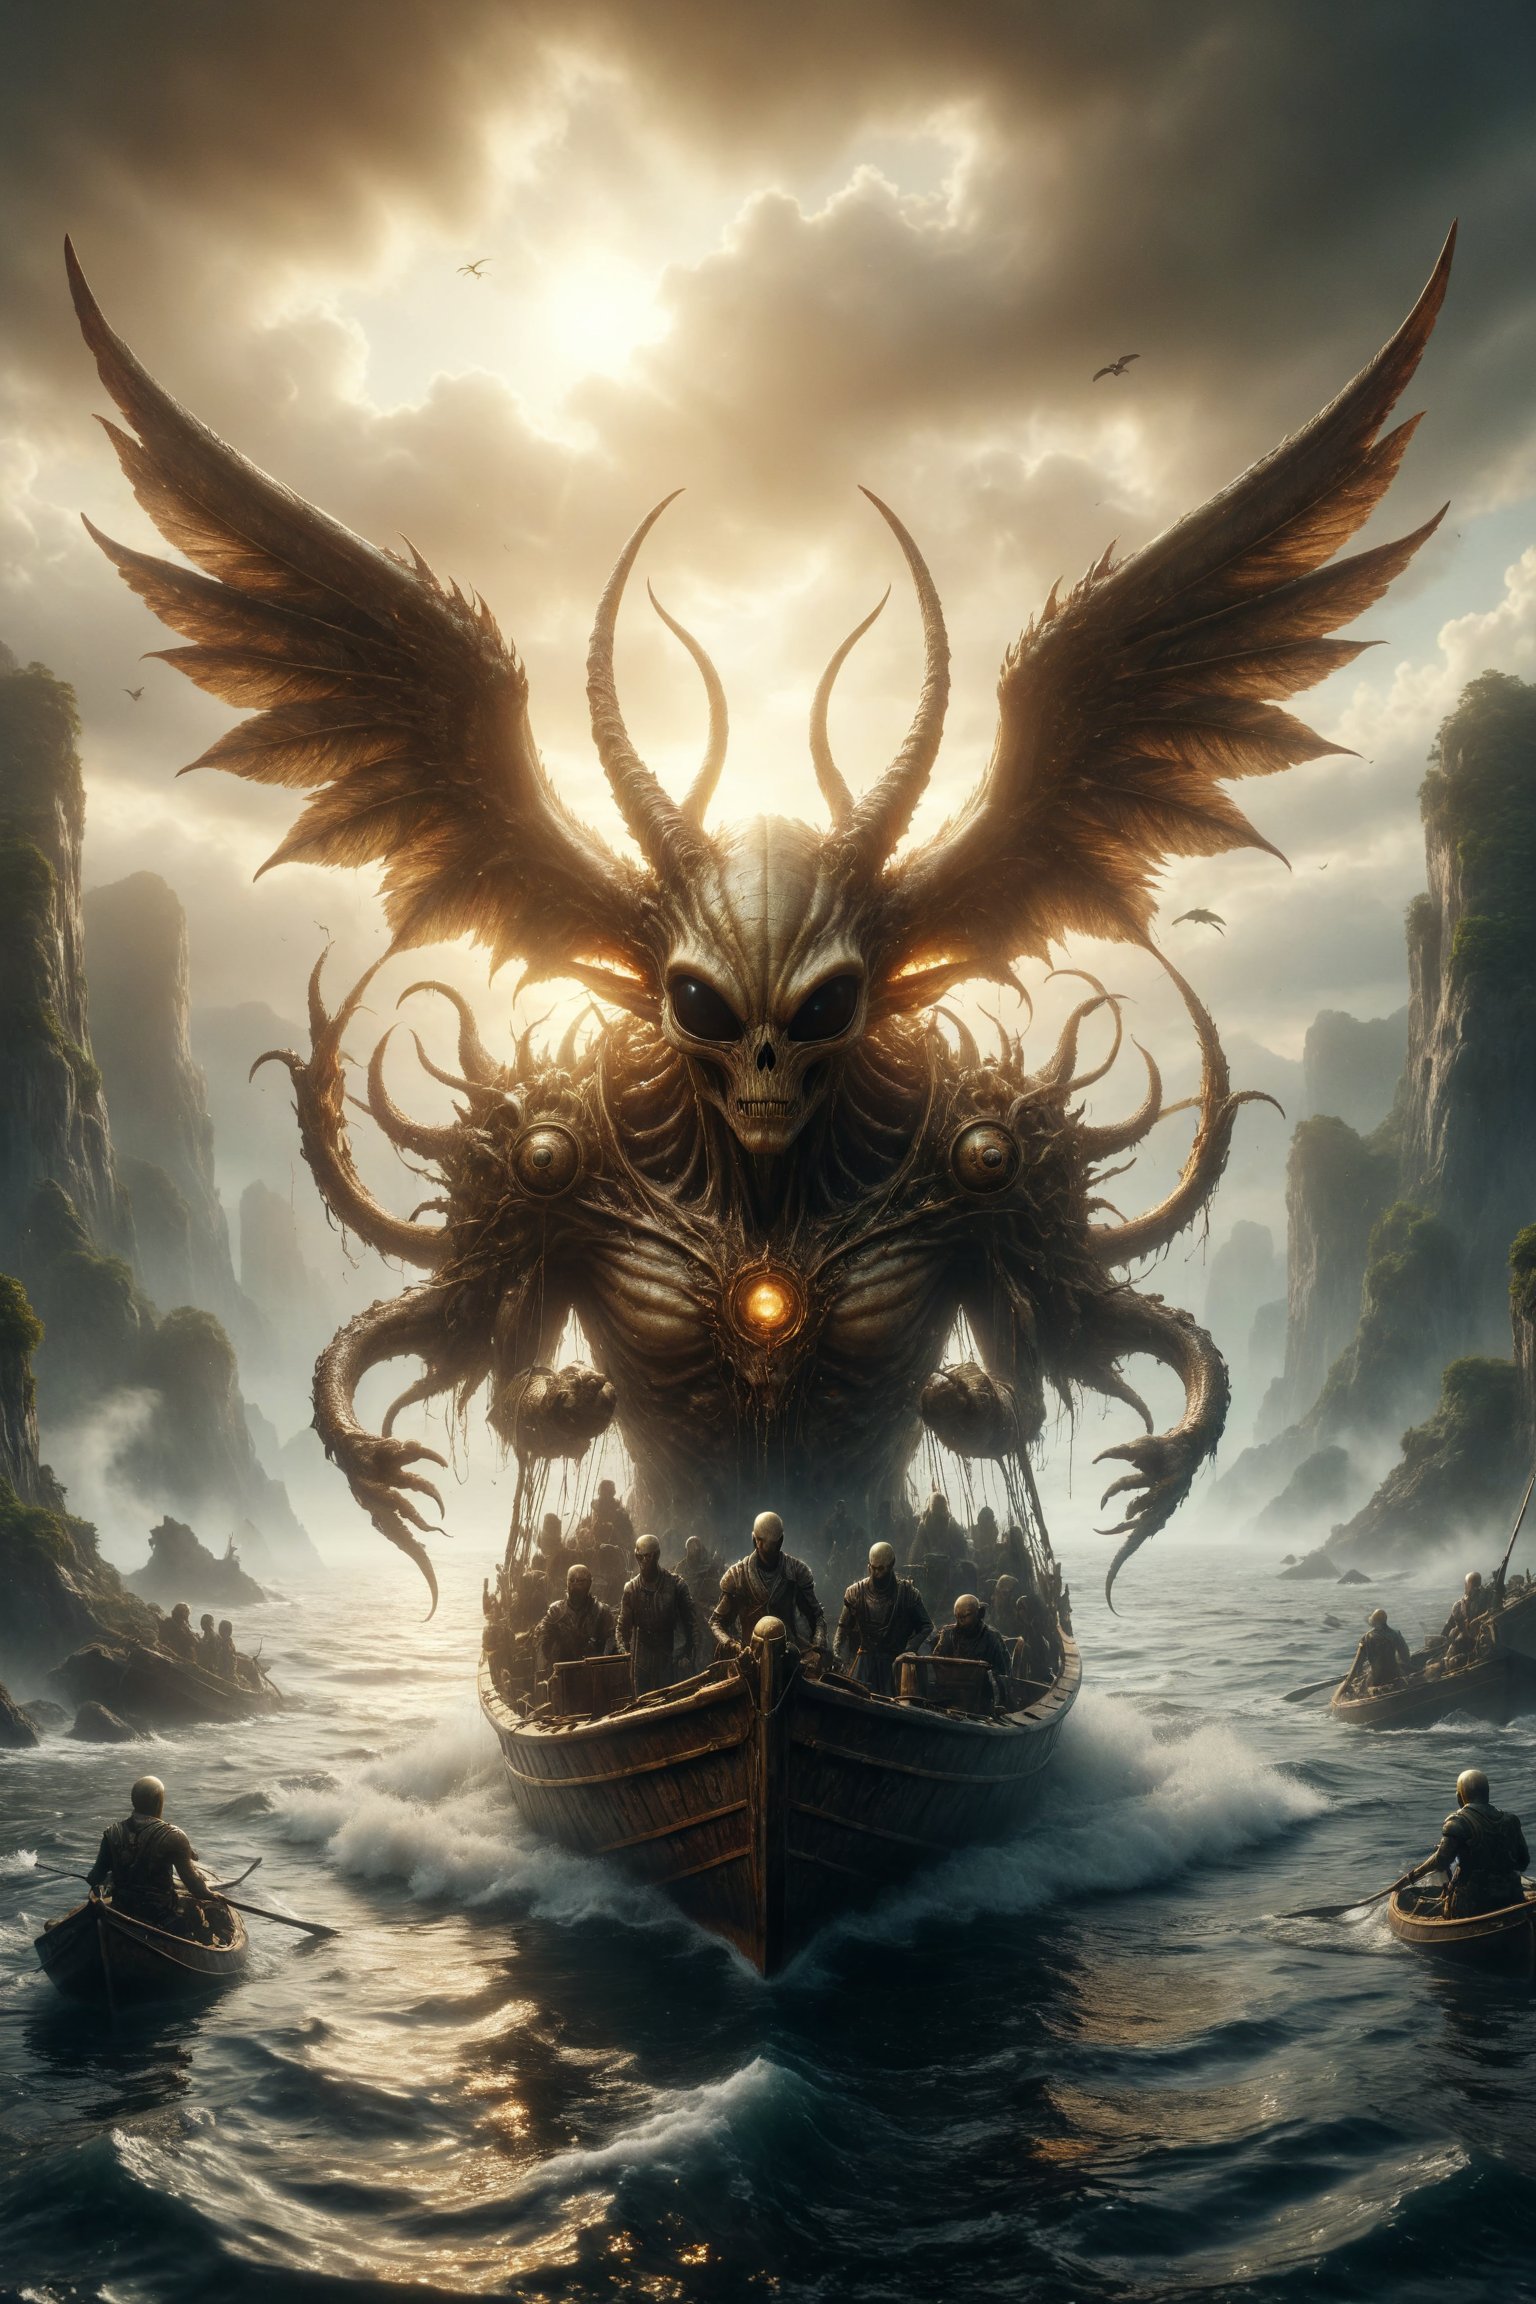 Generate a scene of a  golden luxury alien with wings and horns and its family sailing in a boat towards calm waters, leaving behind turbulent waters and six swords stuck in the bottom, symbolizing transition, journey, and overcoming.